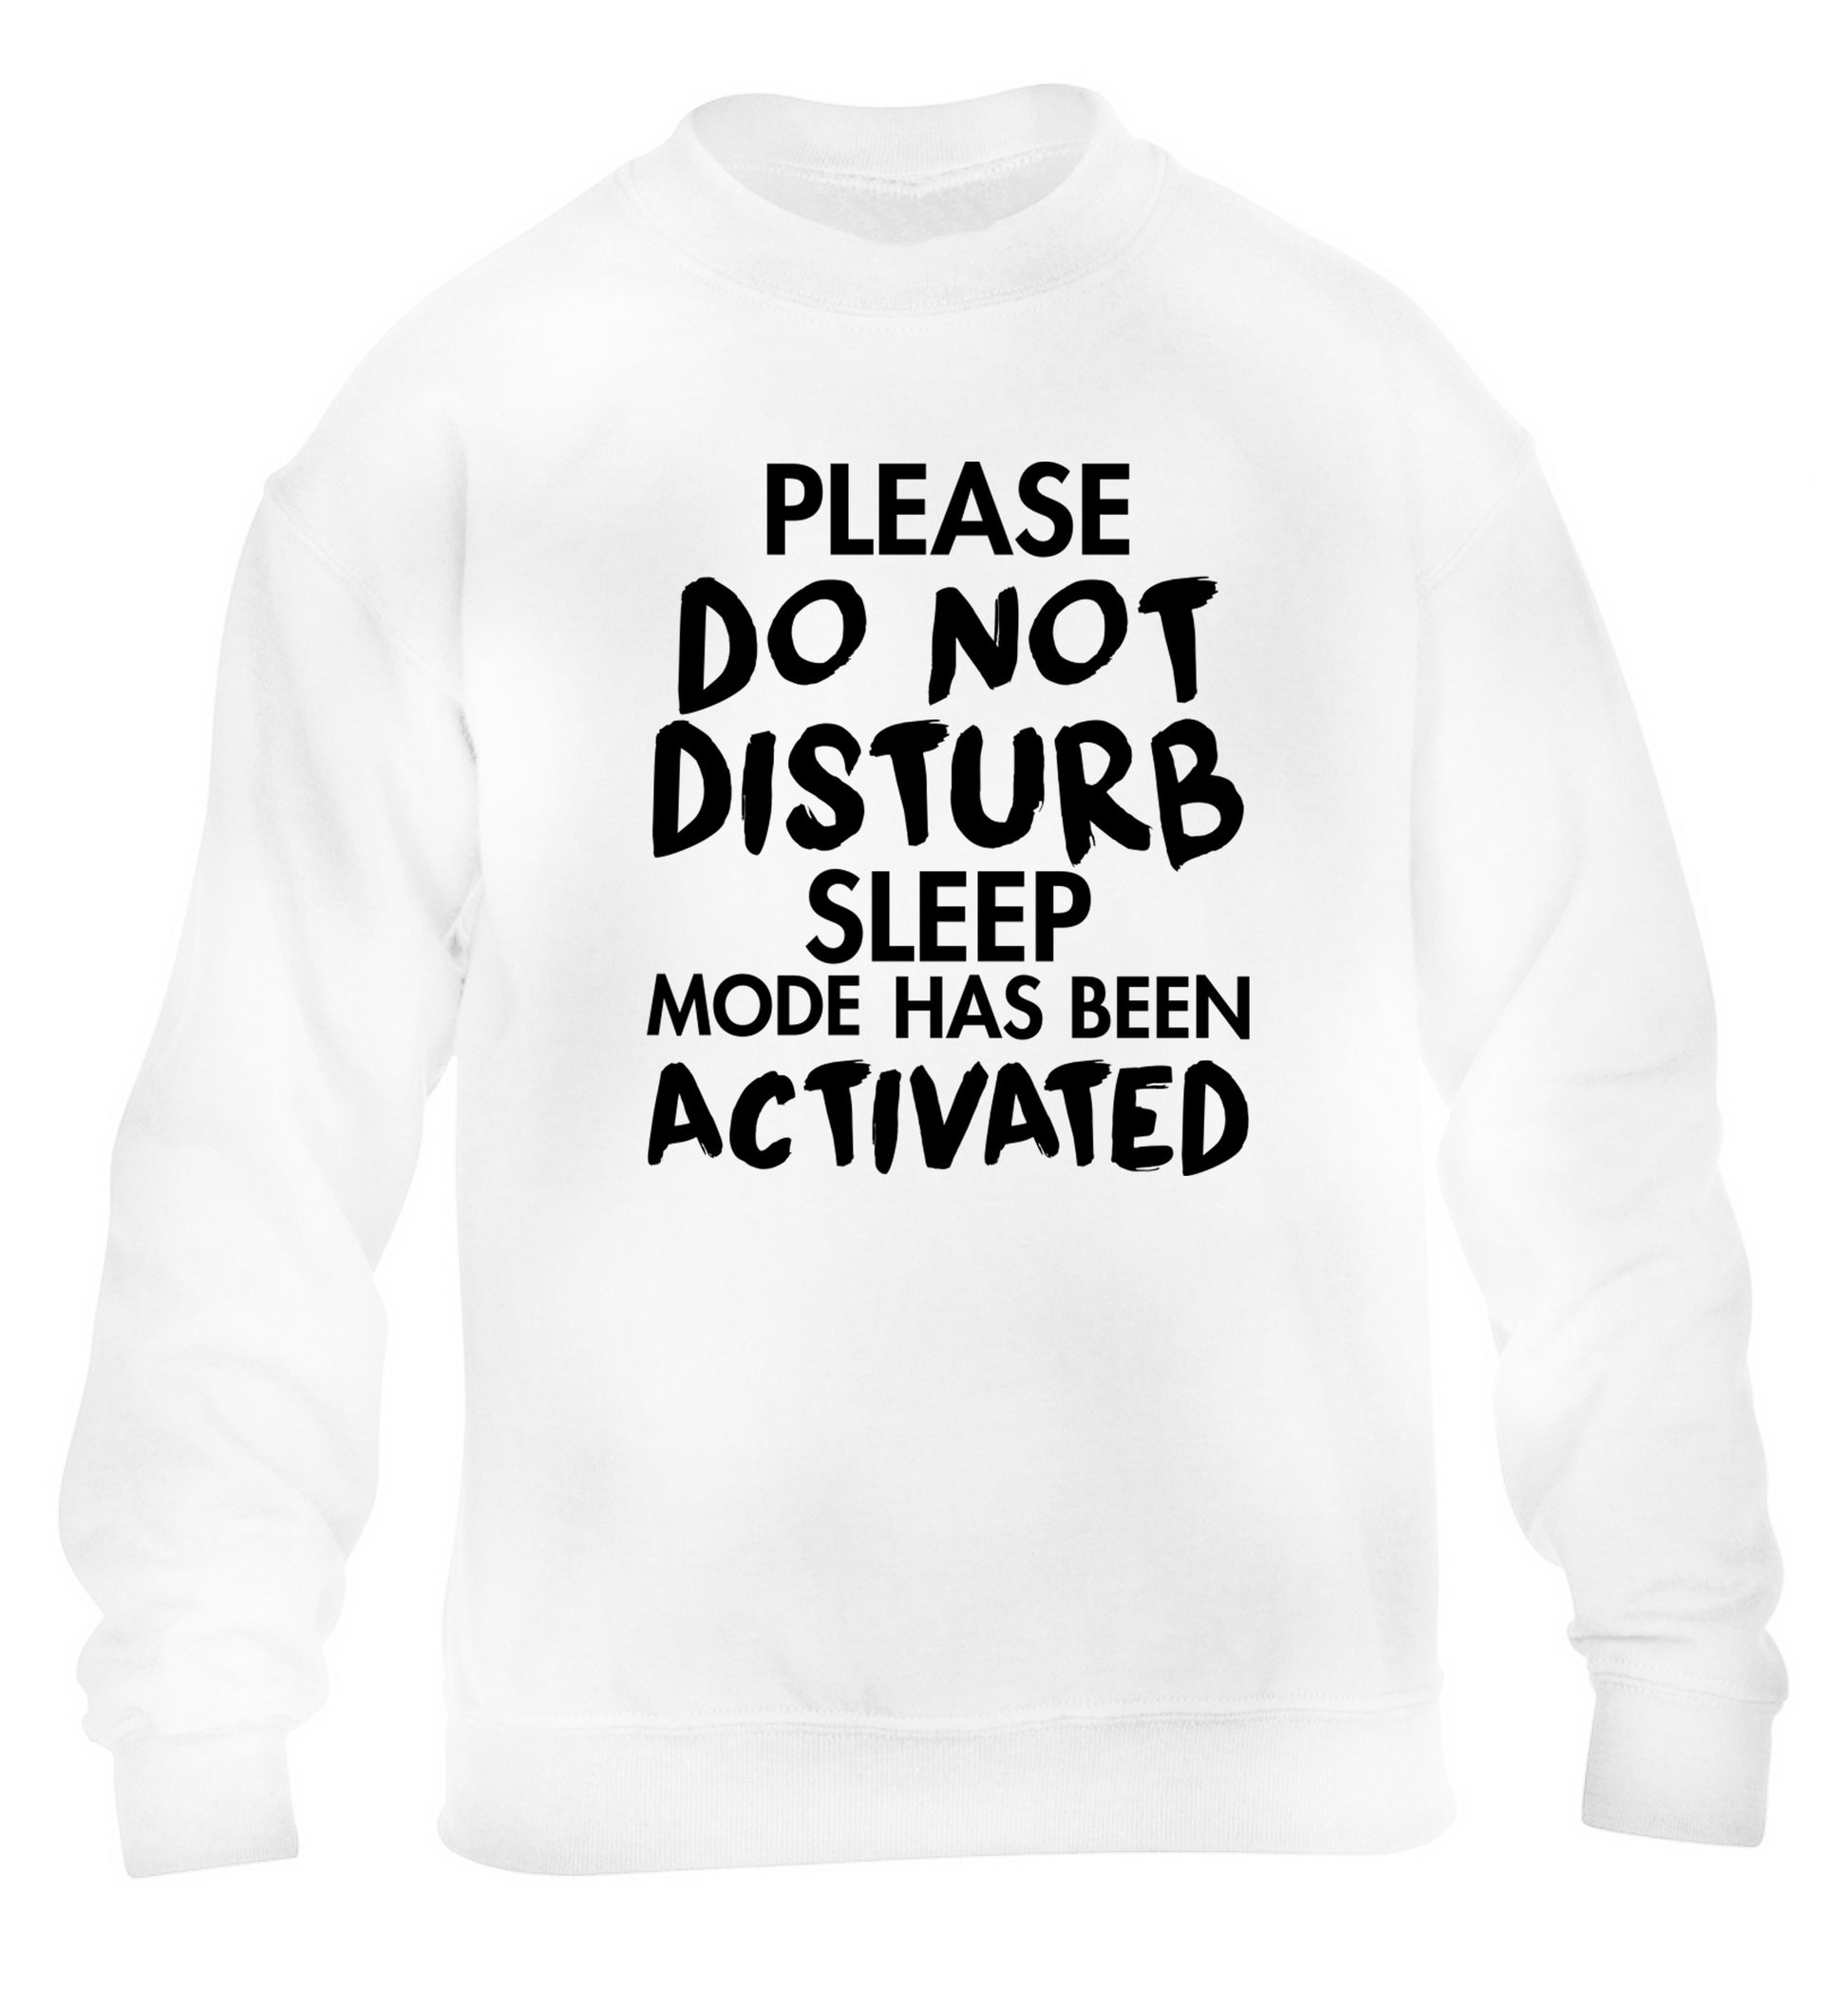 Please do not disturb sleeping mode has been activated children's white sweater 12-14 Years